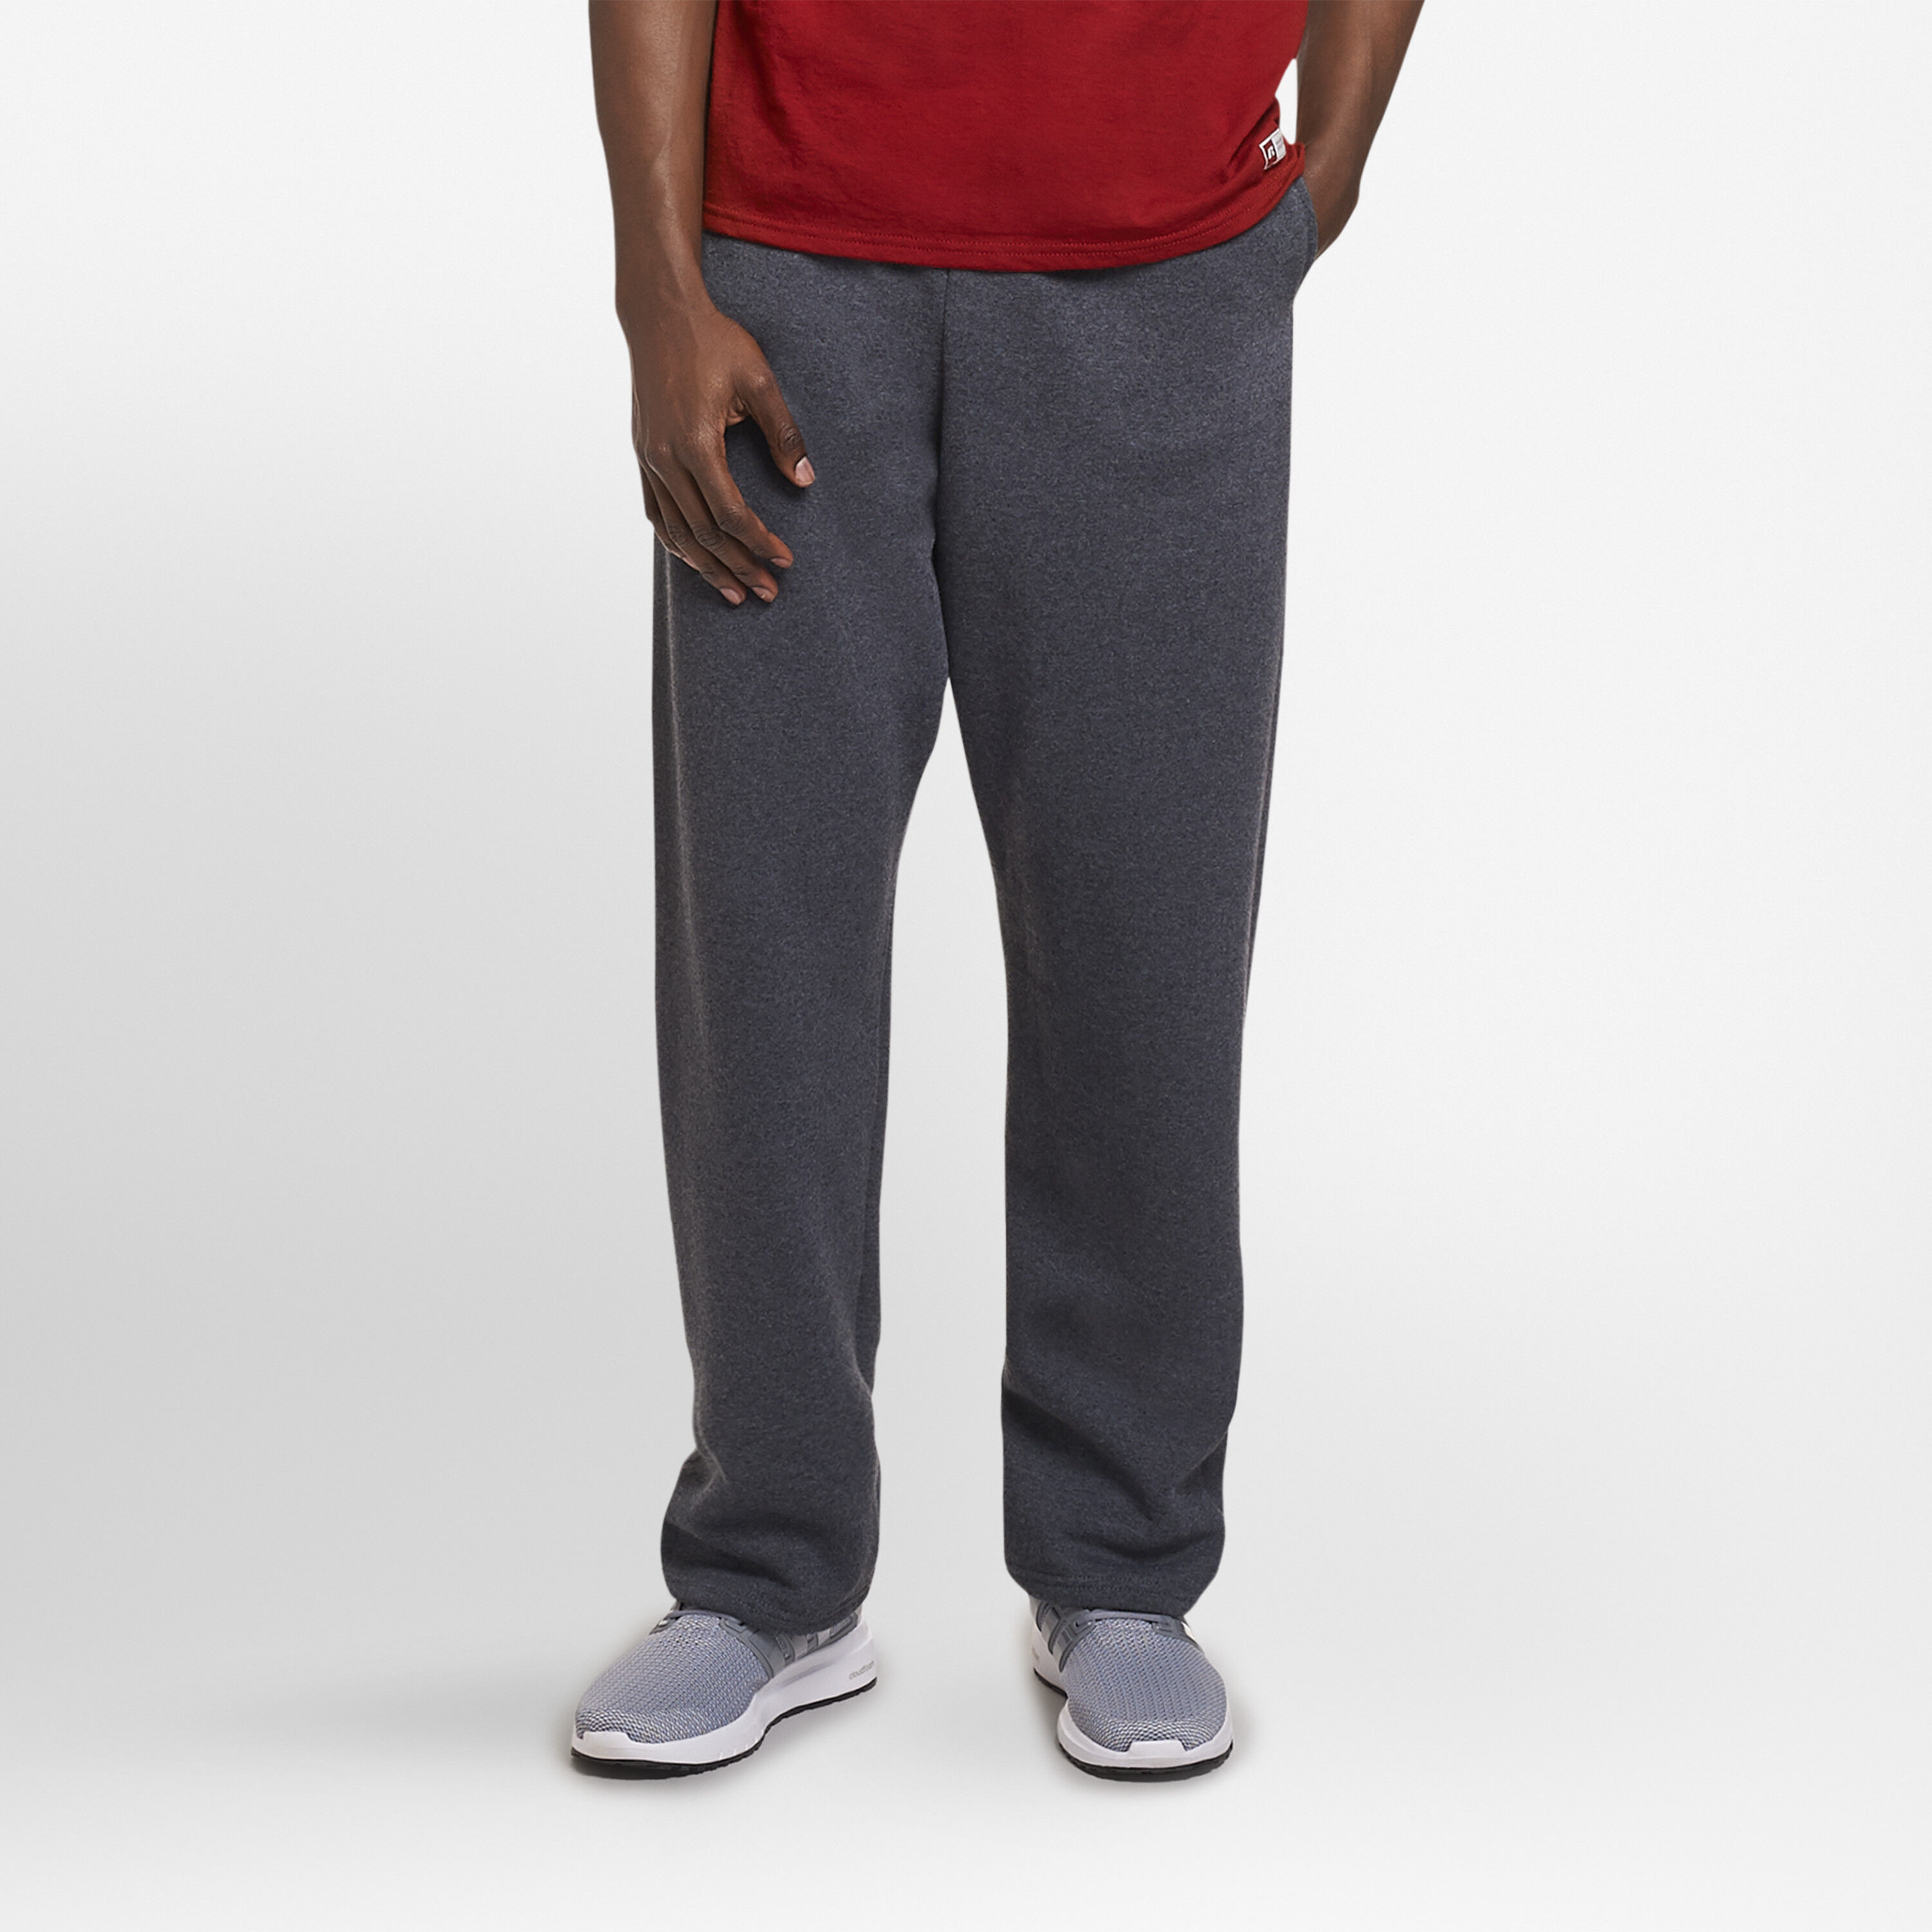 russell athletic jersey pants